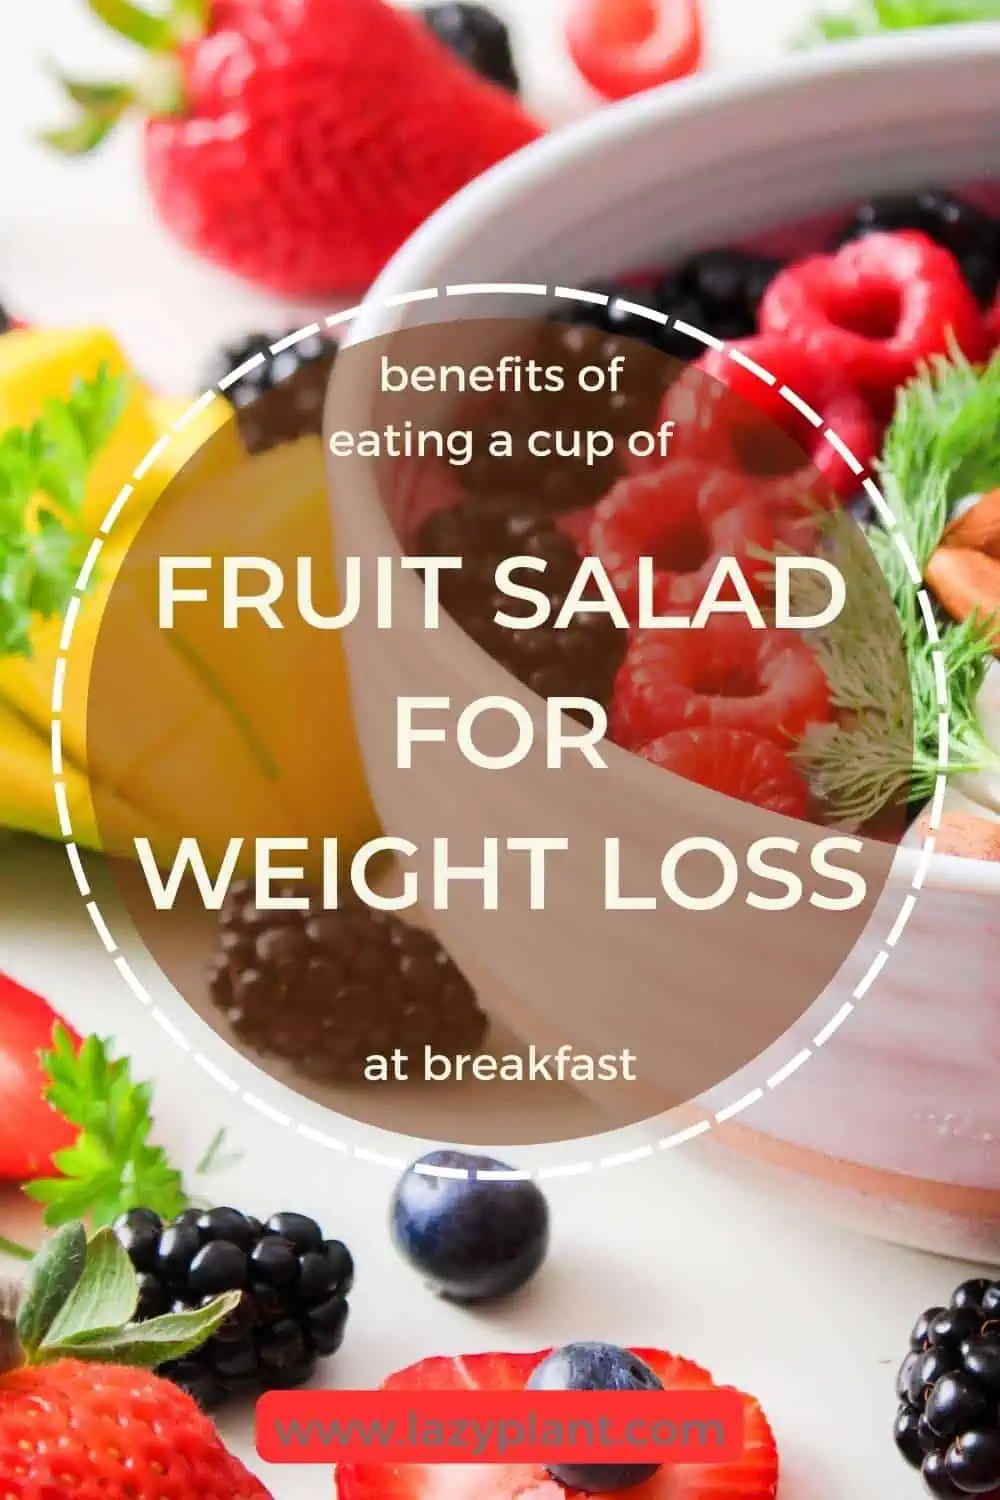 Benefits of eating a cup of fruit salad every morning for weight loss!